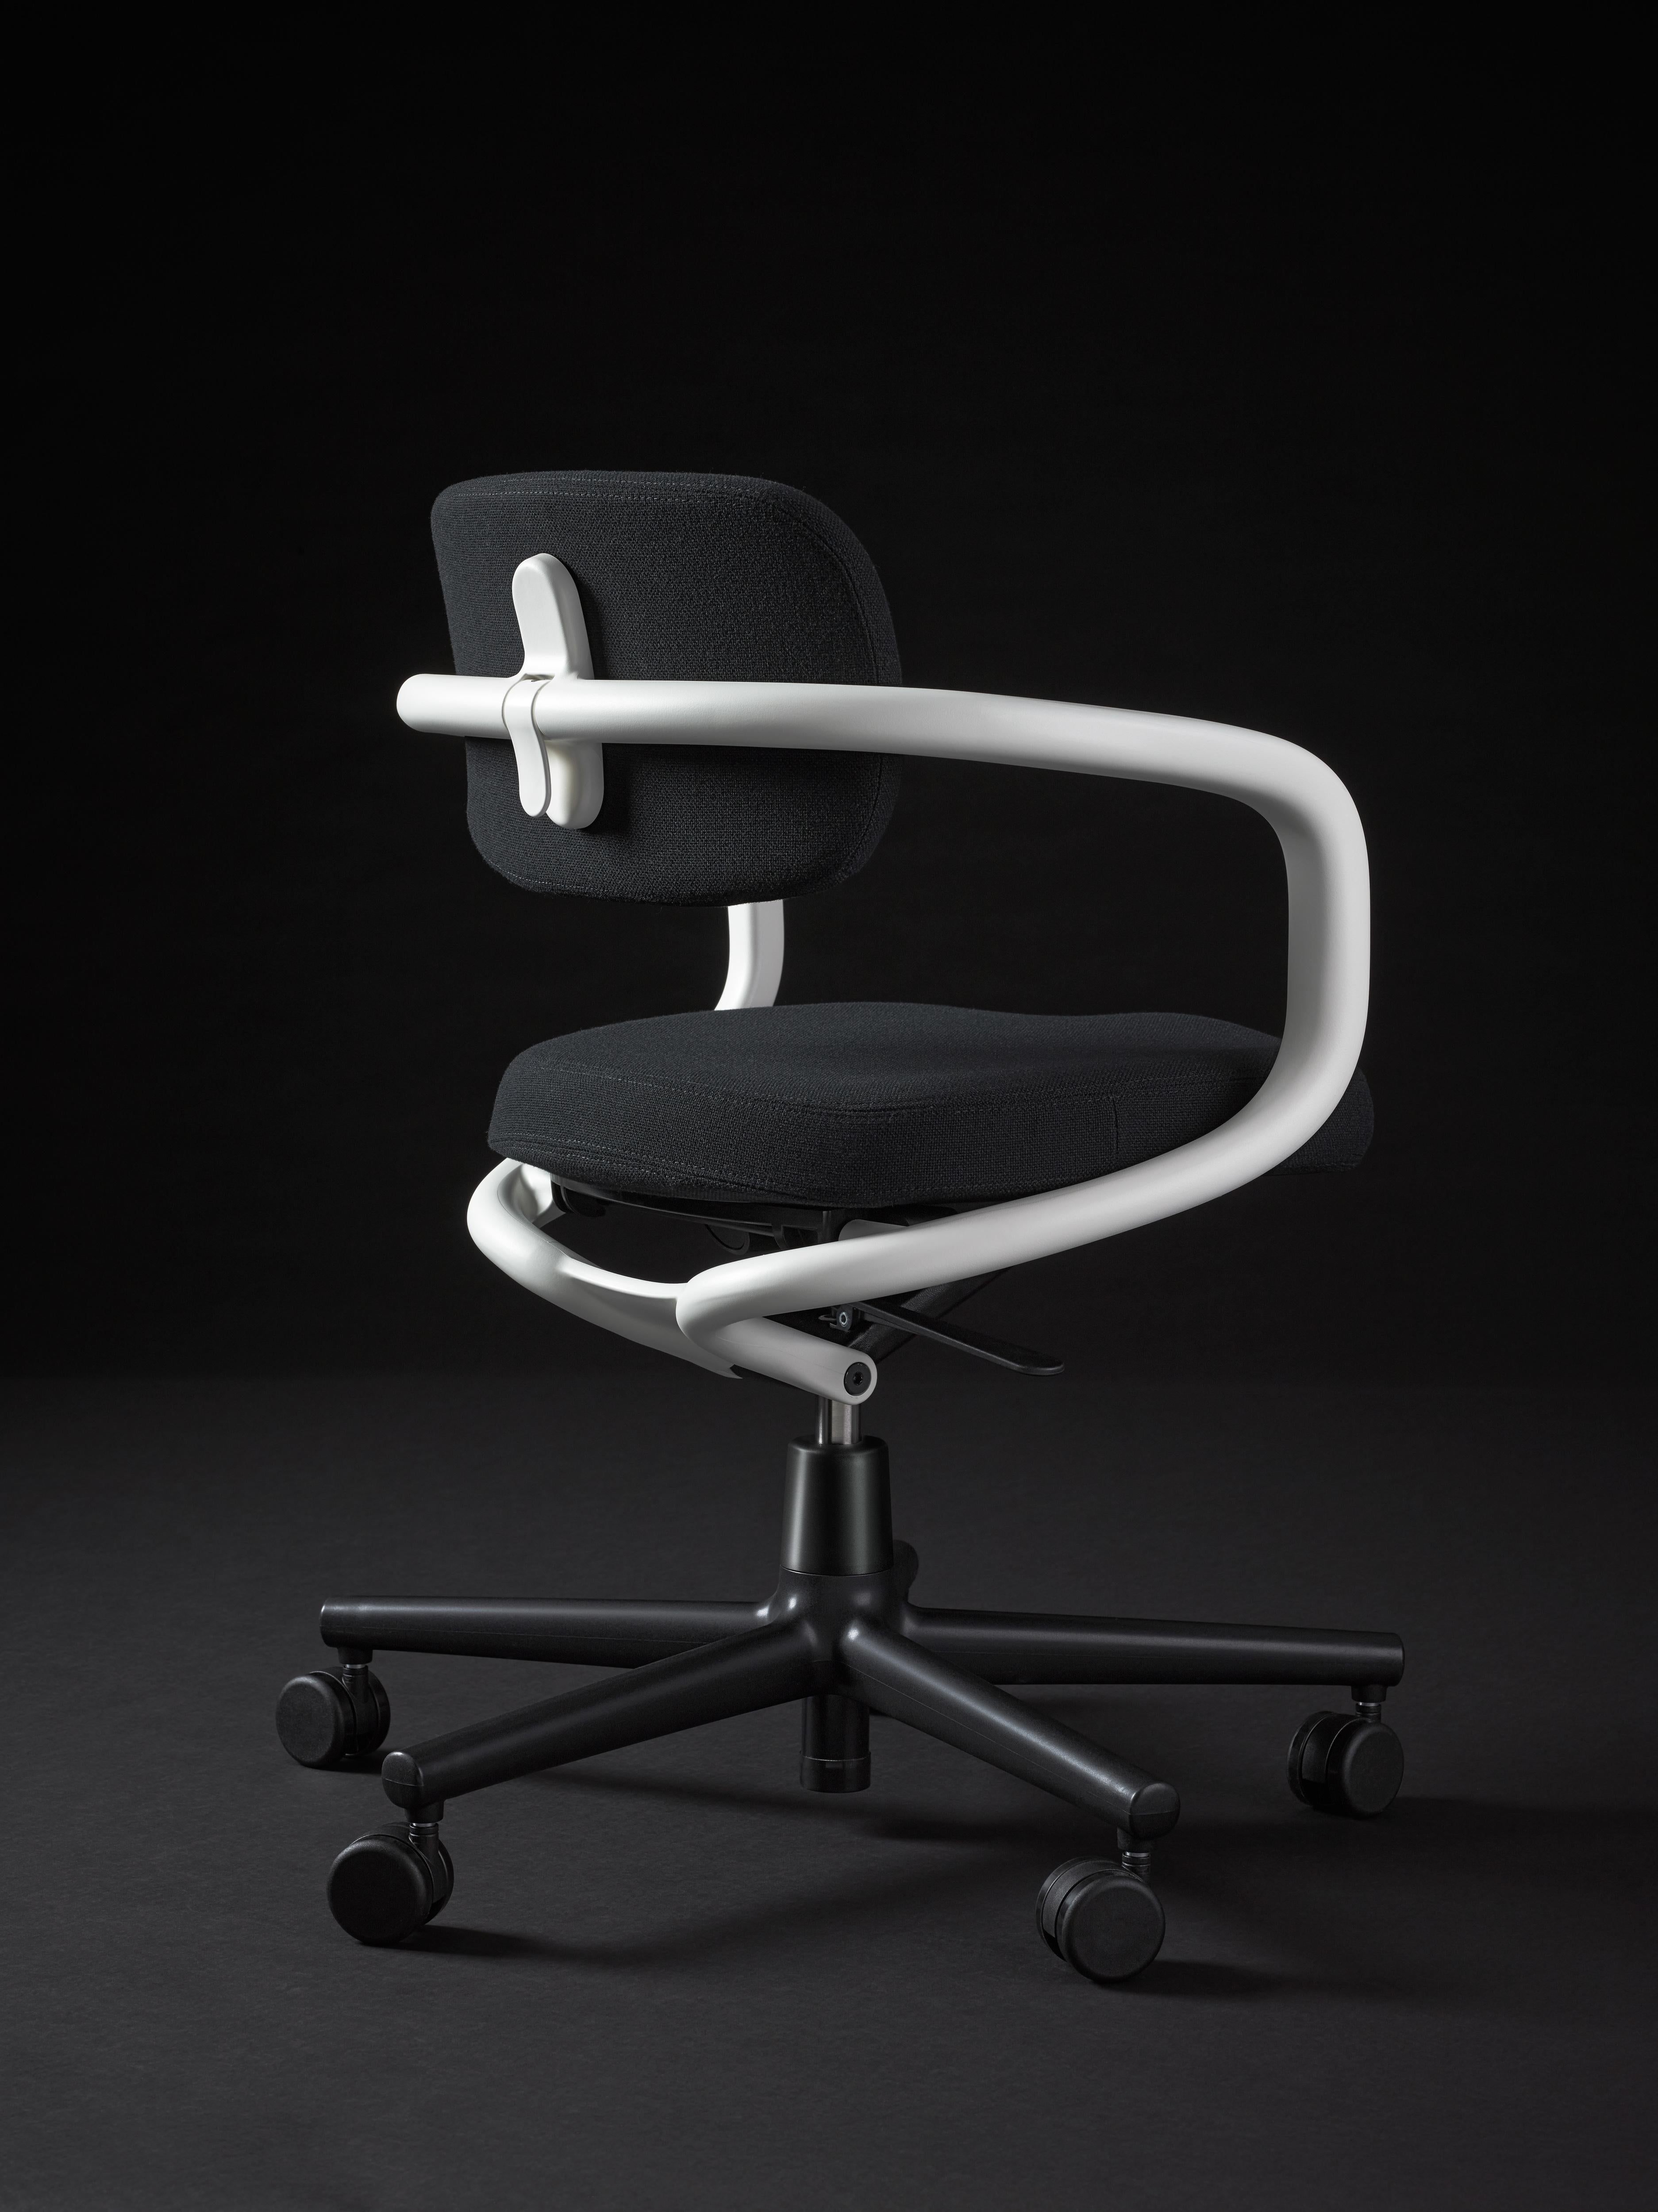 Vitra Allstar Chair in Nero Hopsak with White Armrest by Konstantin Grcic In New Condition For Sale In New York, NY